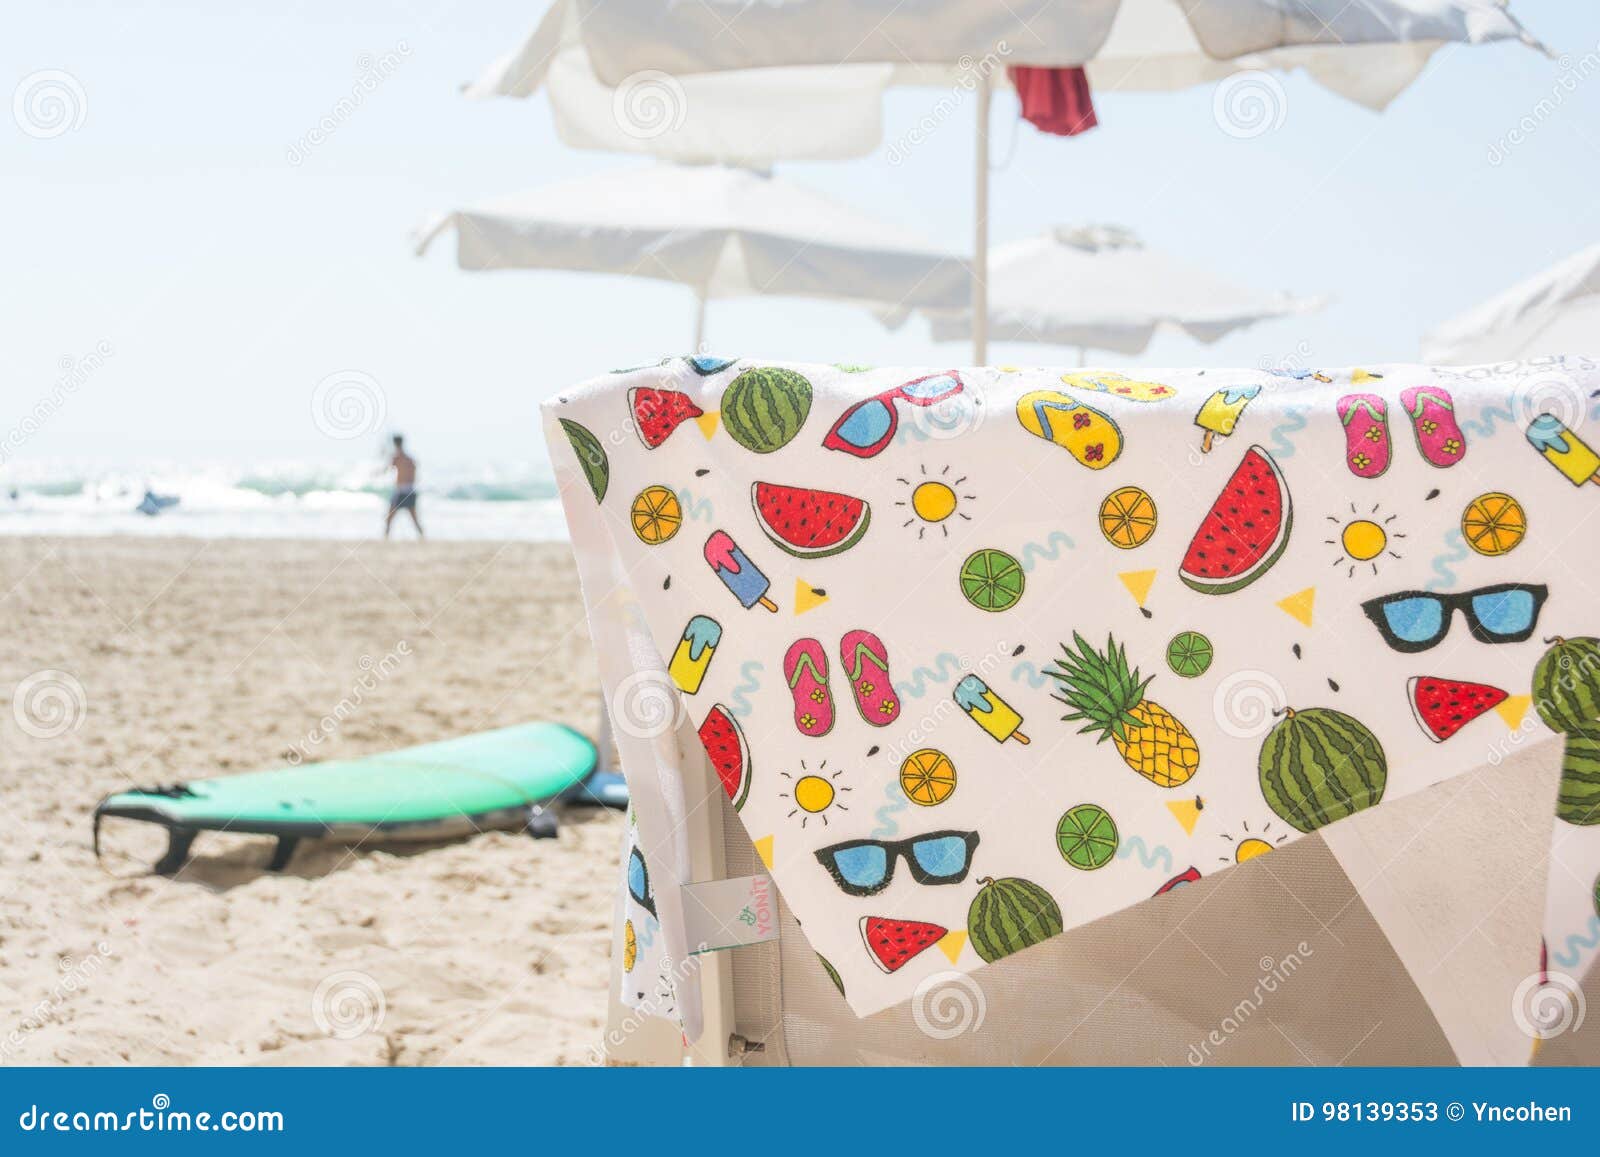 Colorful Summer Beach Towel On Chair Stock Image - Image of 